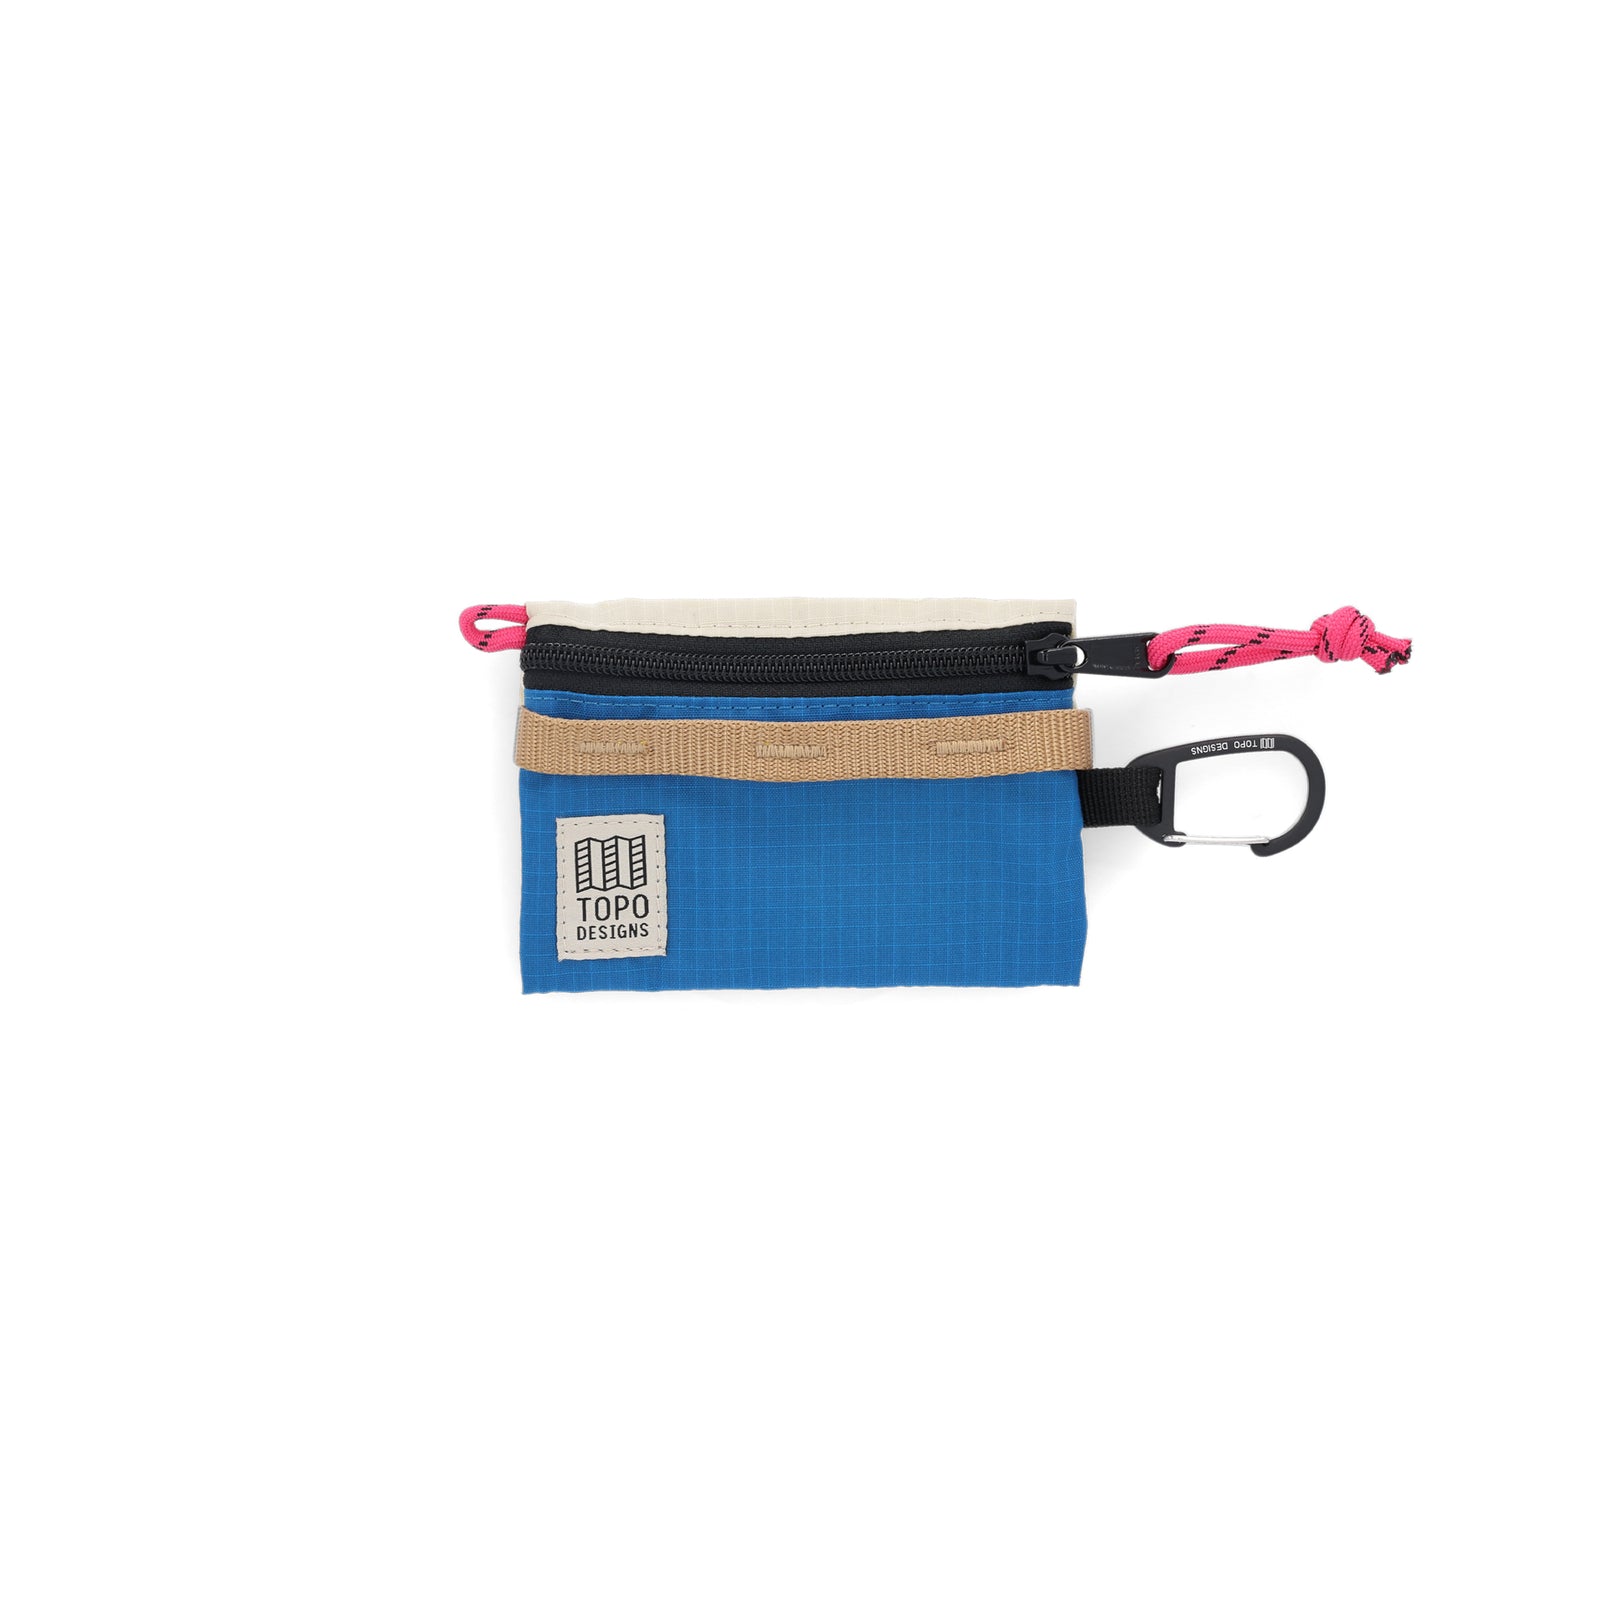 Topo Designs Mountain Accessory Bag carabiner clip pouch keychain wallet in "Bone White / Blue" lightweight recycled nylon.